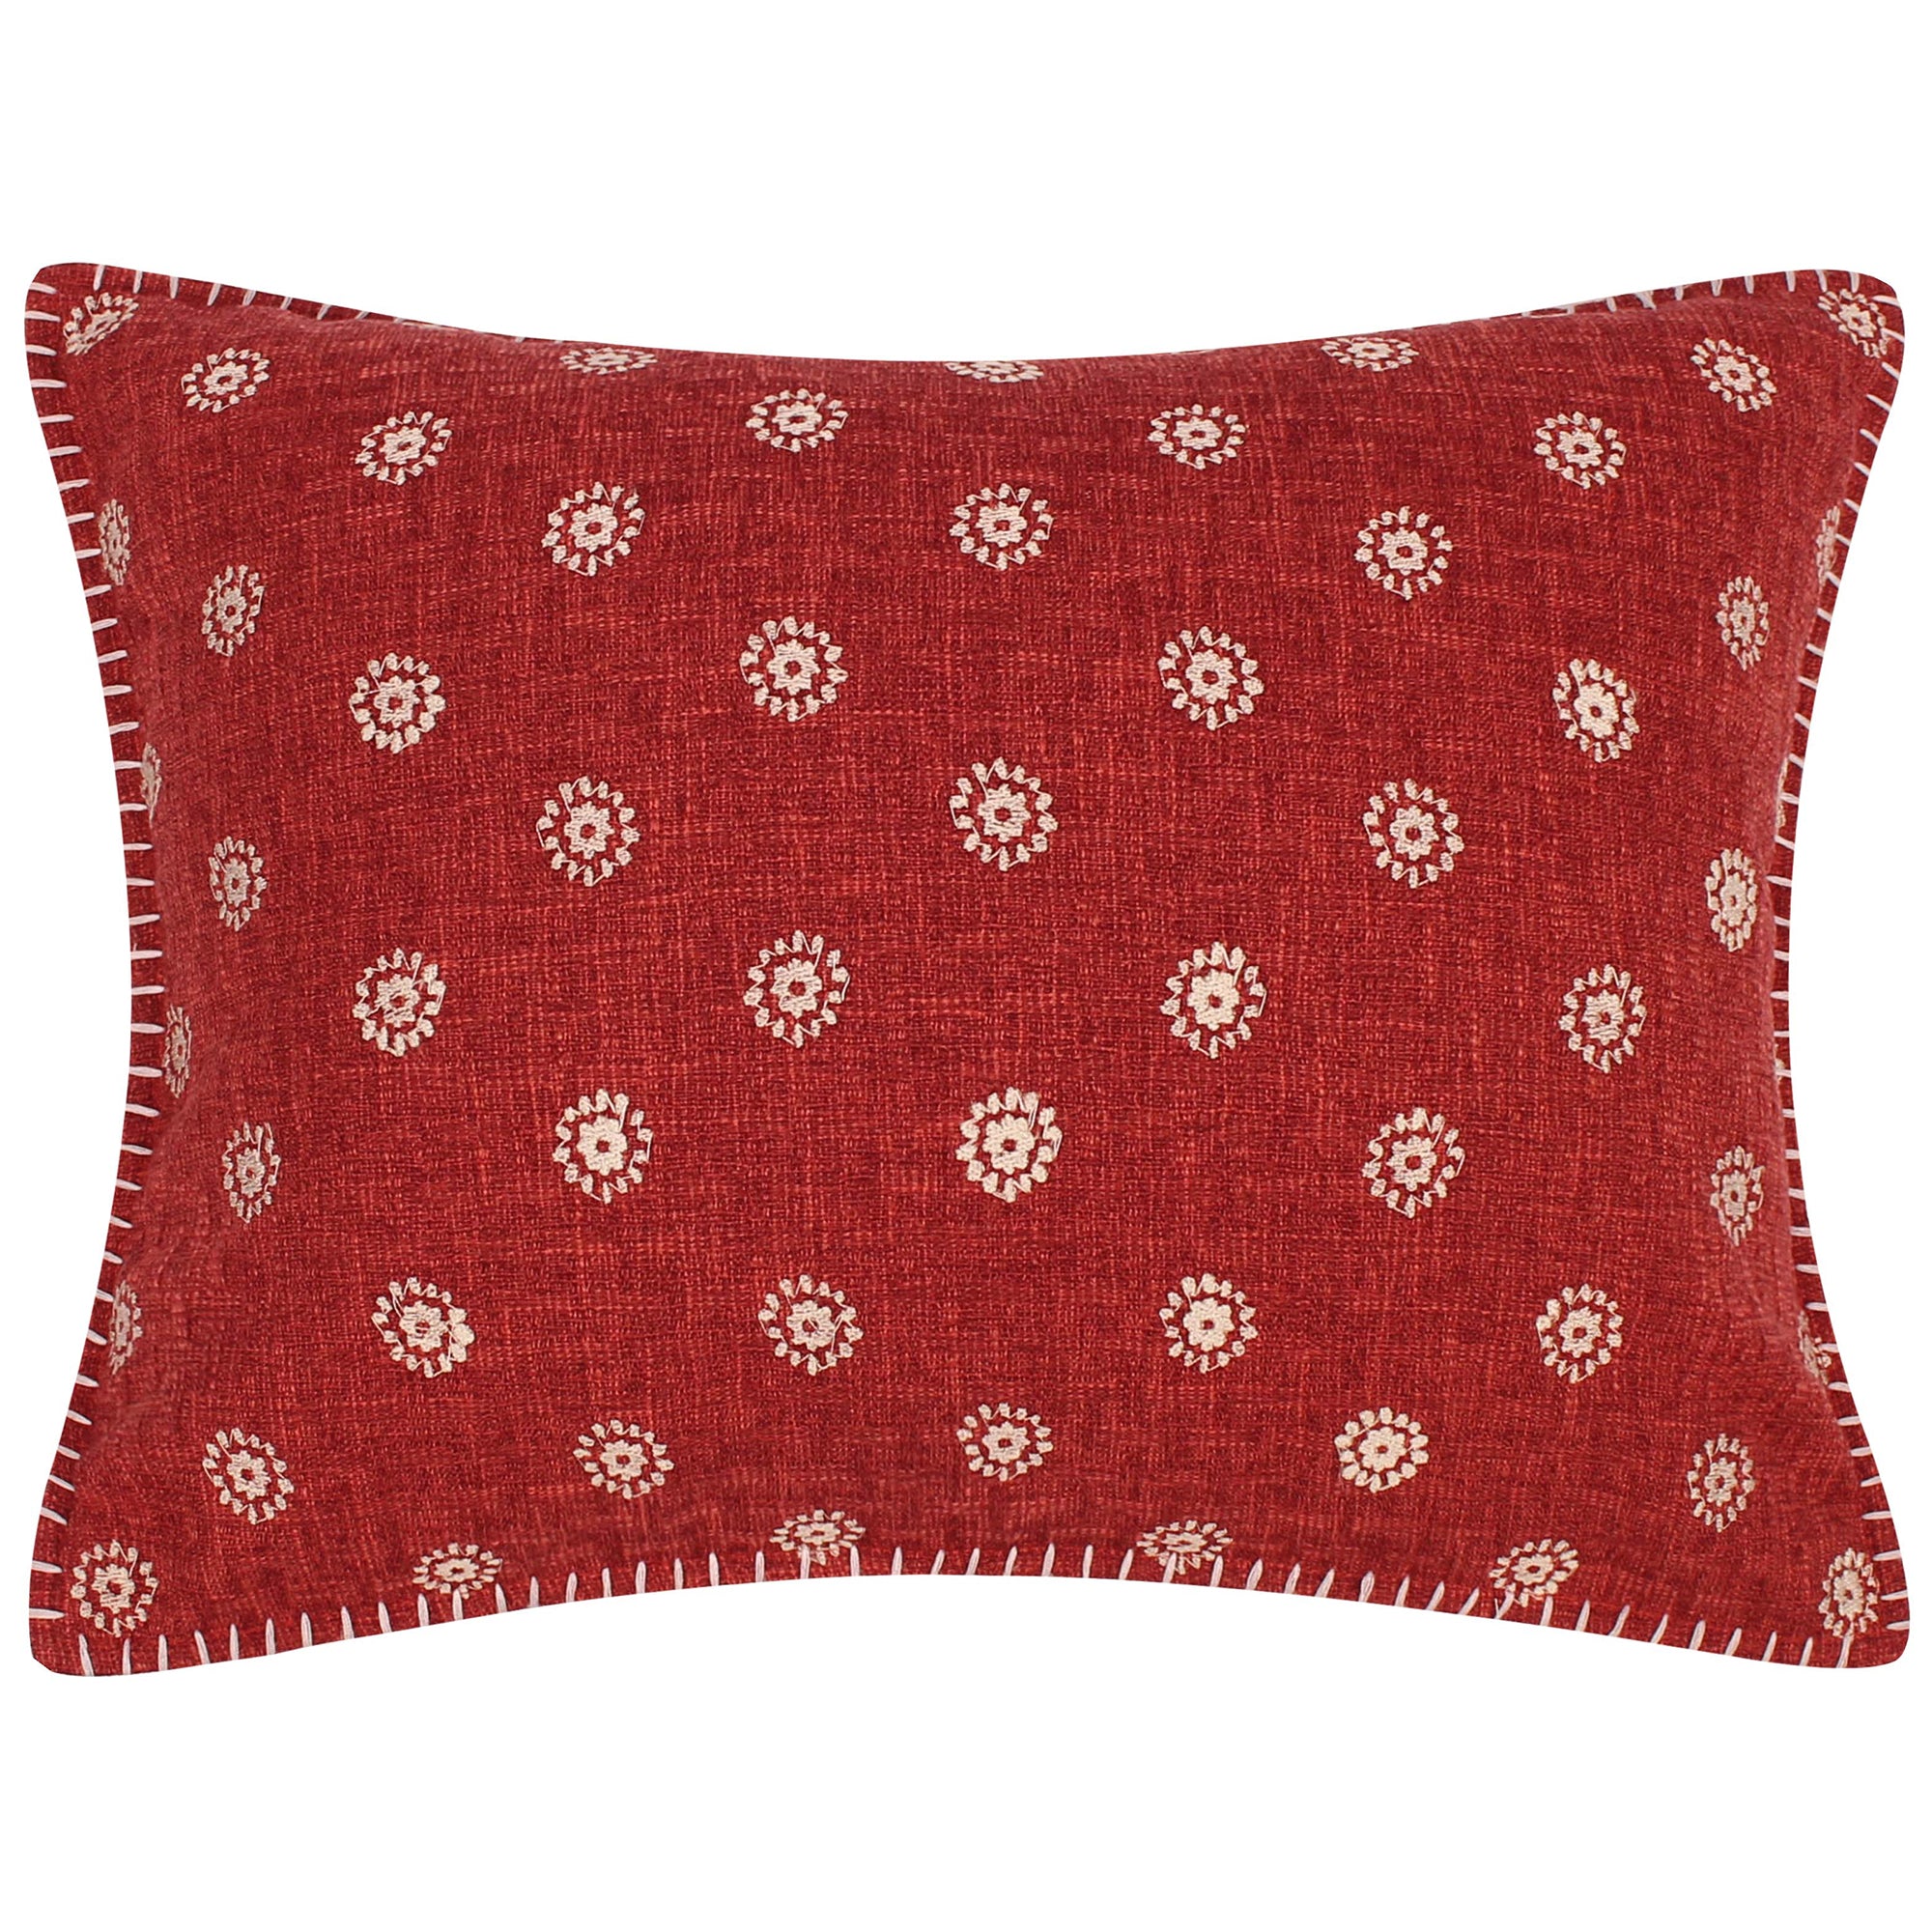 Emel Red Embroidered Whipstitch Pillow